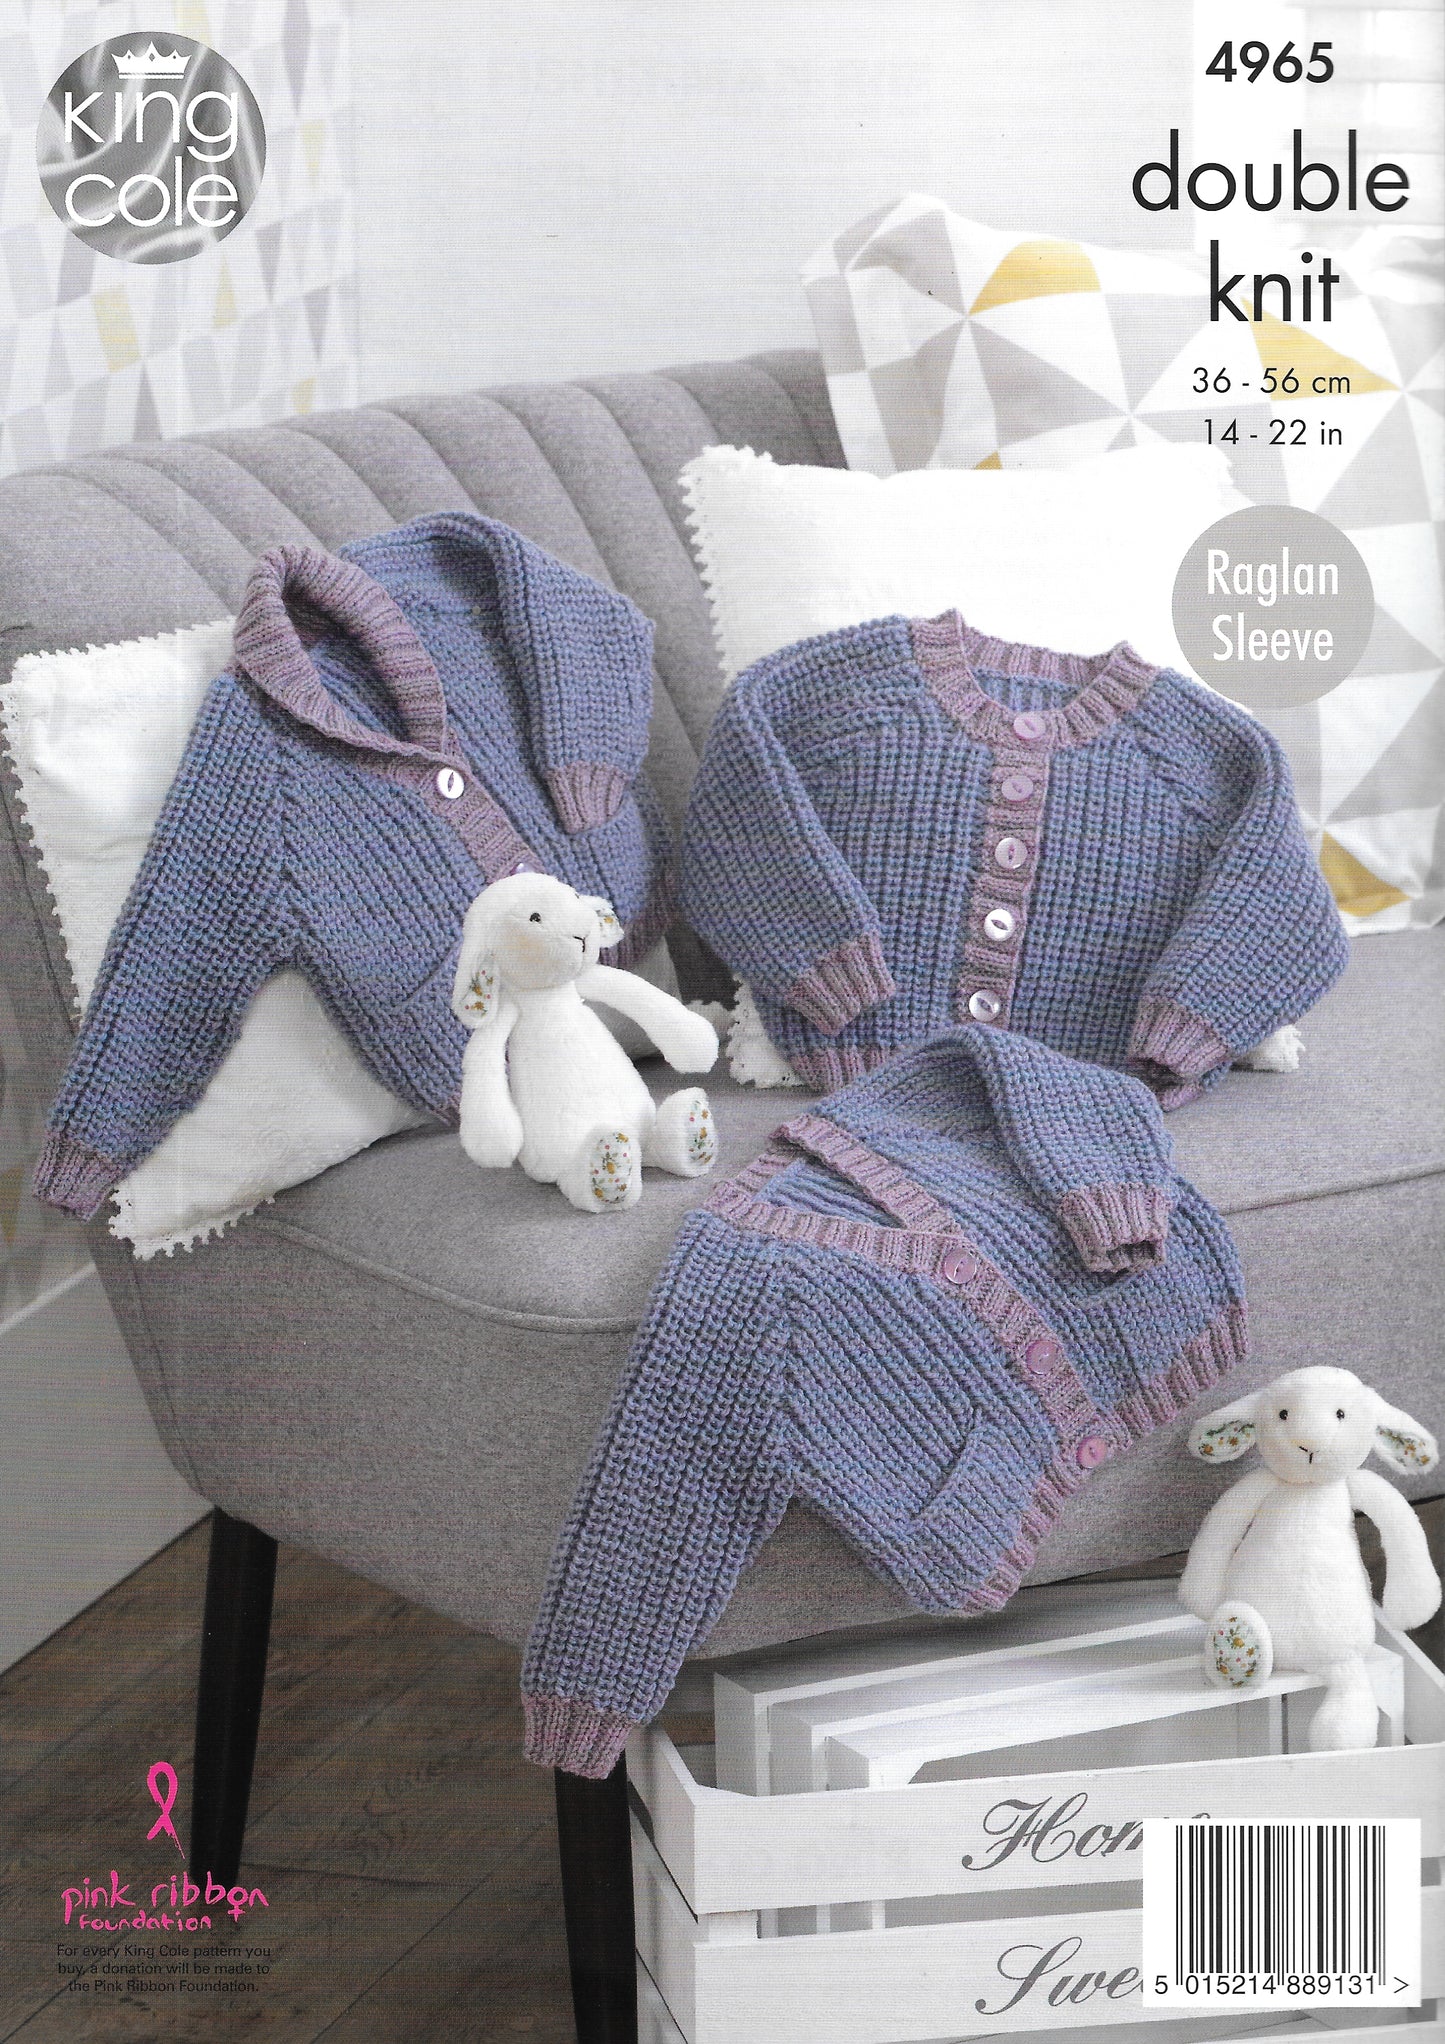 4965 King Cole double knit Cardigans knitting pattern